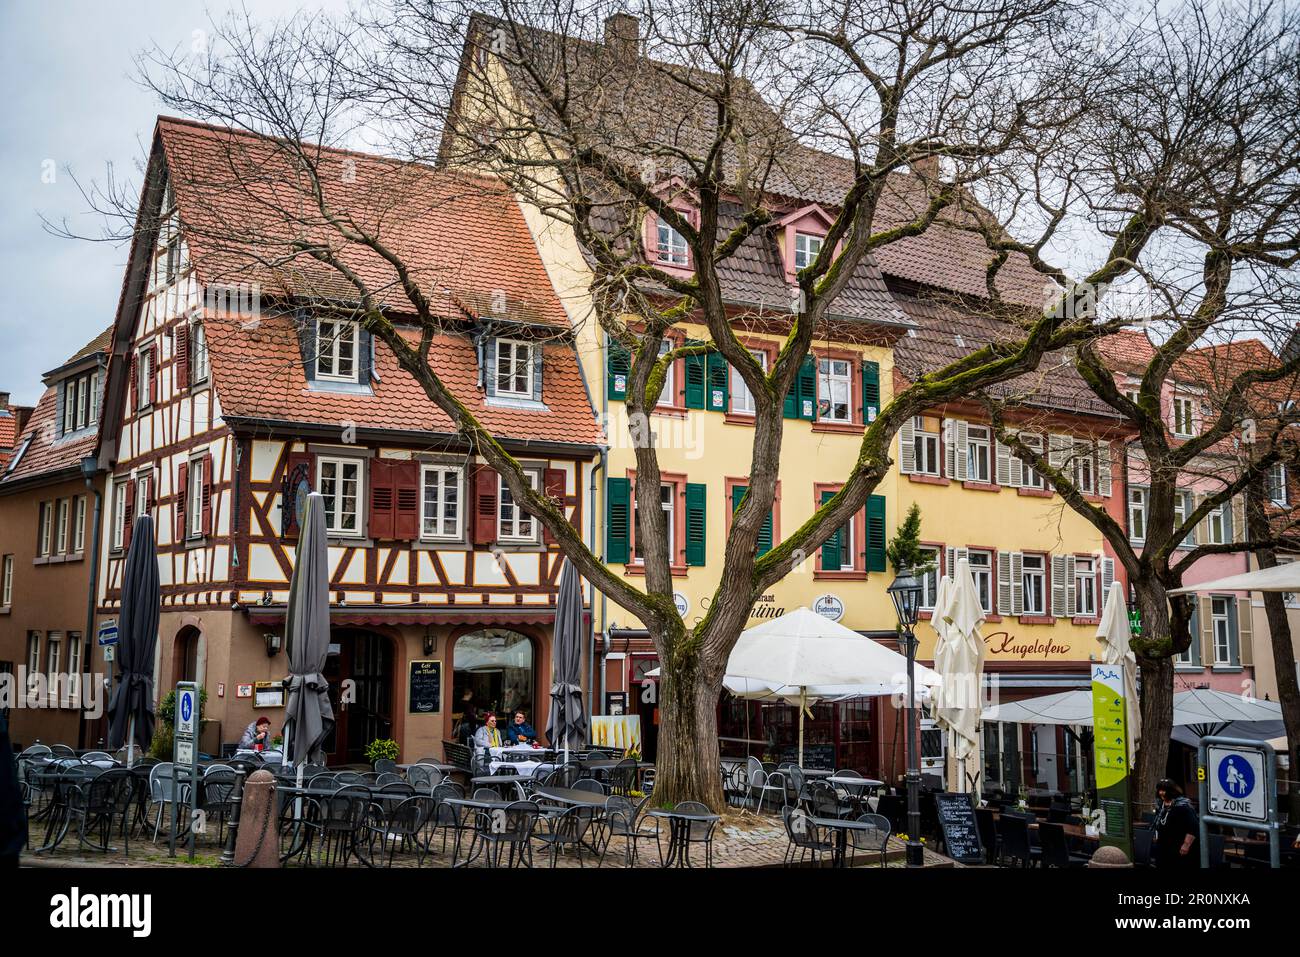 The Market Square with restaurants and old traditional medieval architecture with exposed beams, Weinheim, Baden-Württemberg, Germany Stock Photo